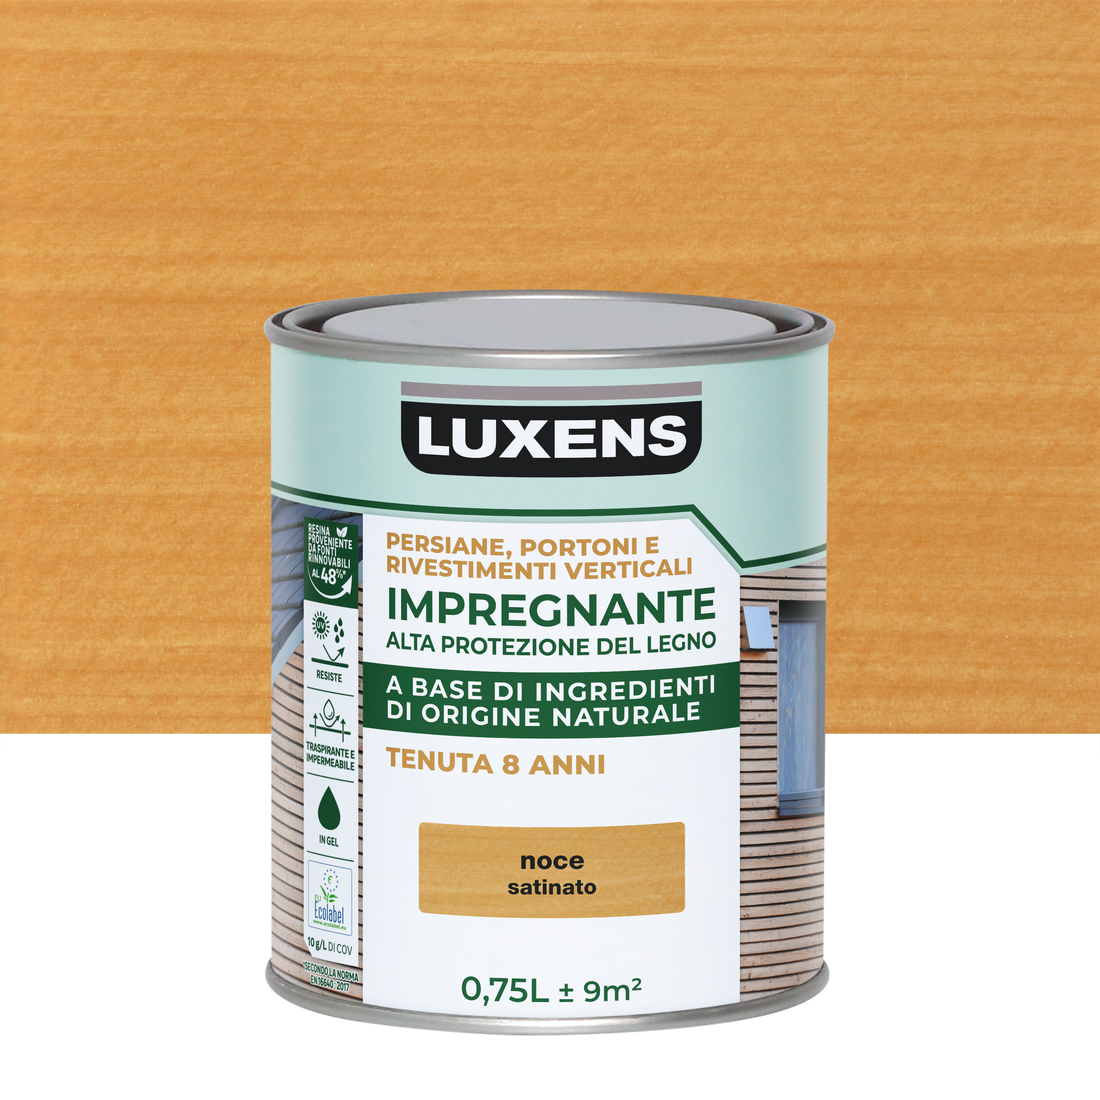 LUXENS HIGH-PROTECTION WALNUT BIO-BASED WOOD PRESERVATIVE 750 ML